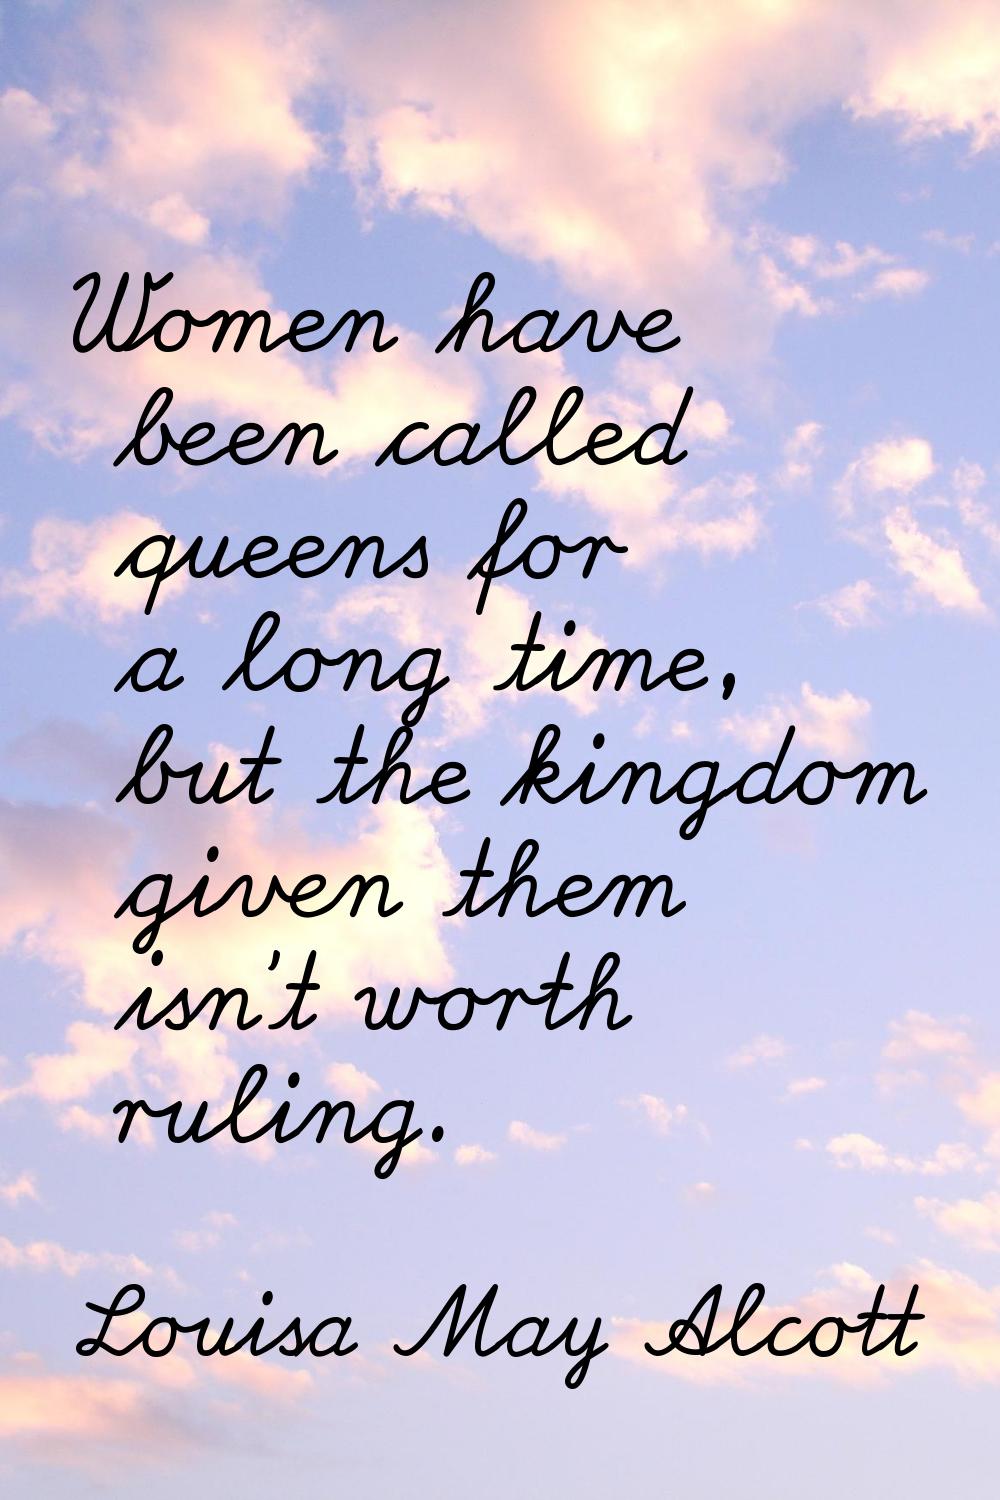 Women have been called queens for a long time, but the kingdom given them isn't worth ruling.